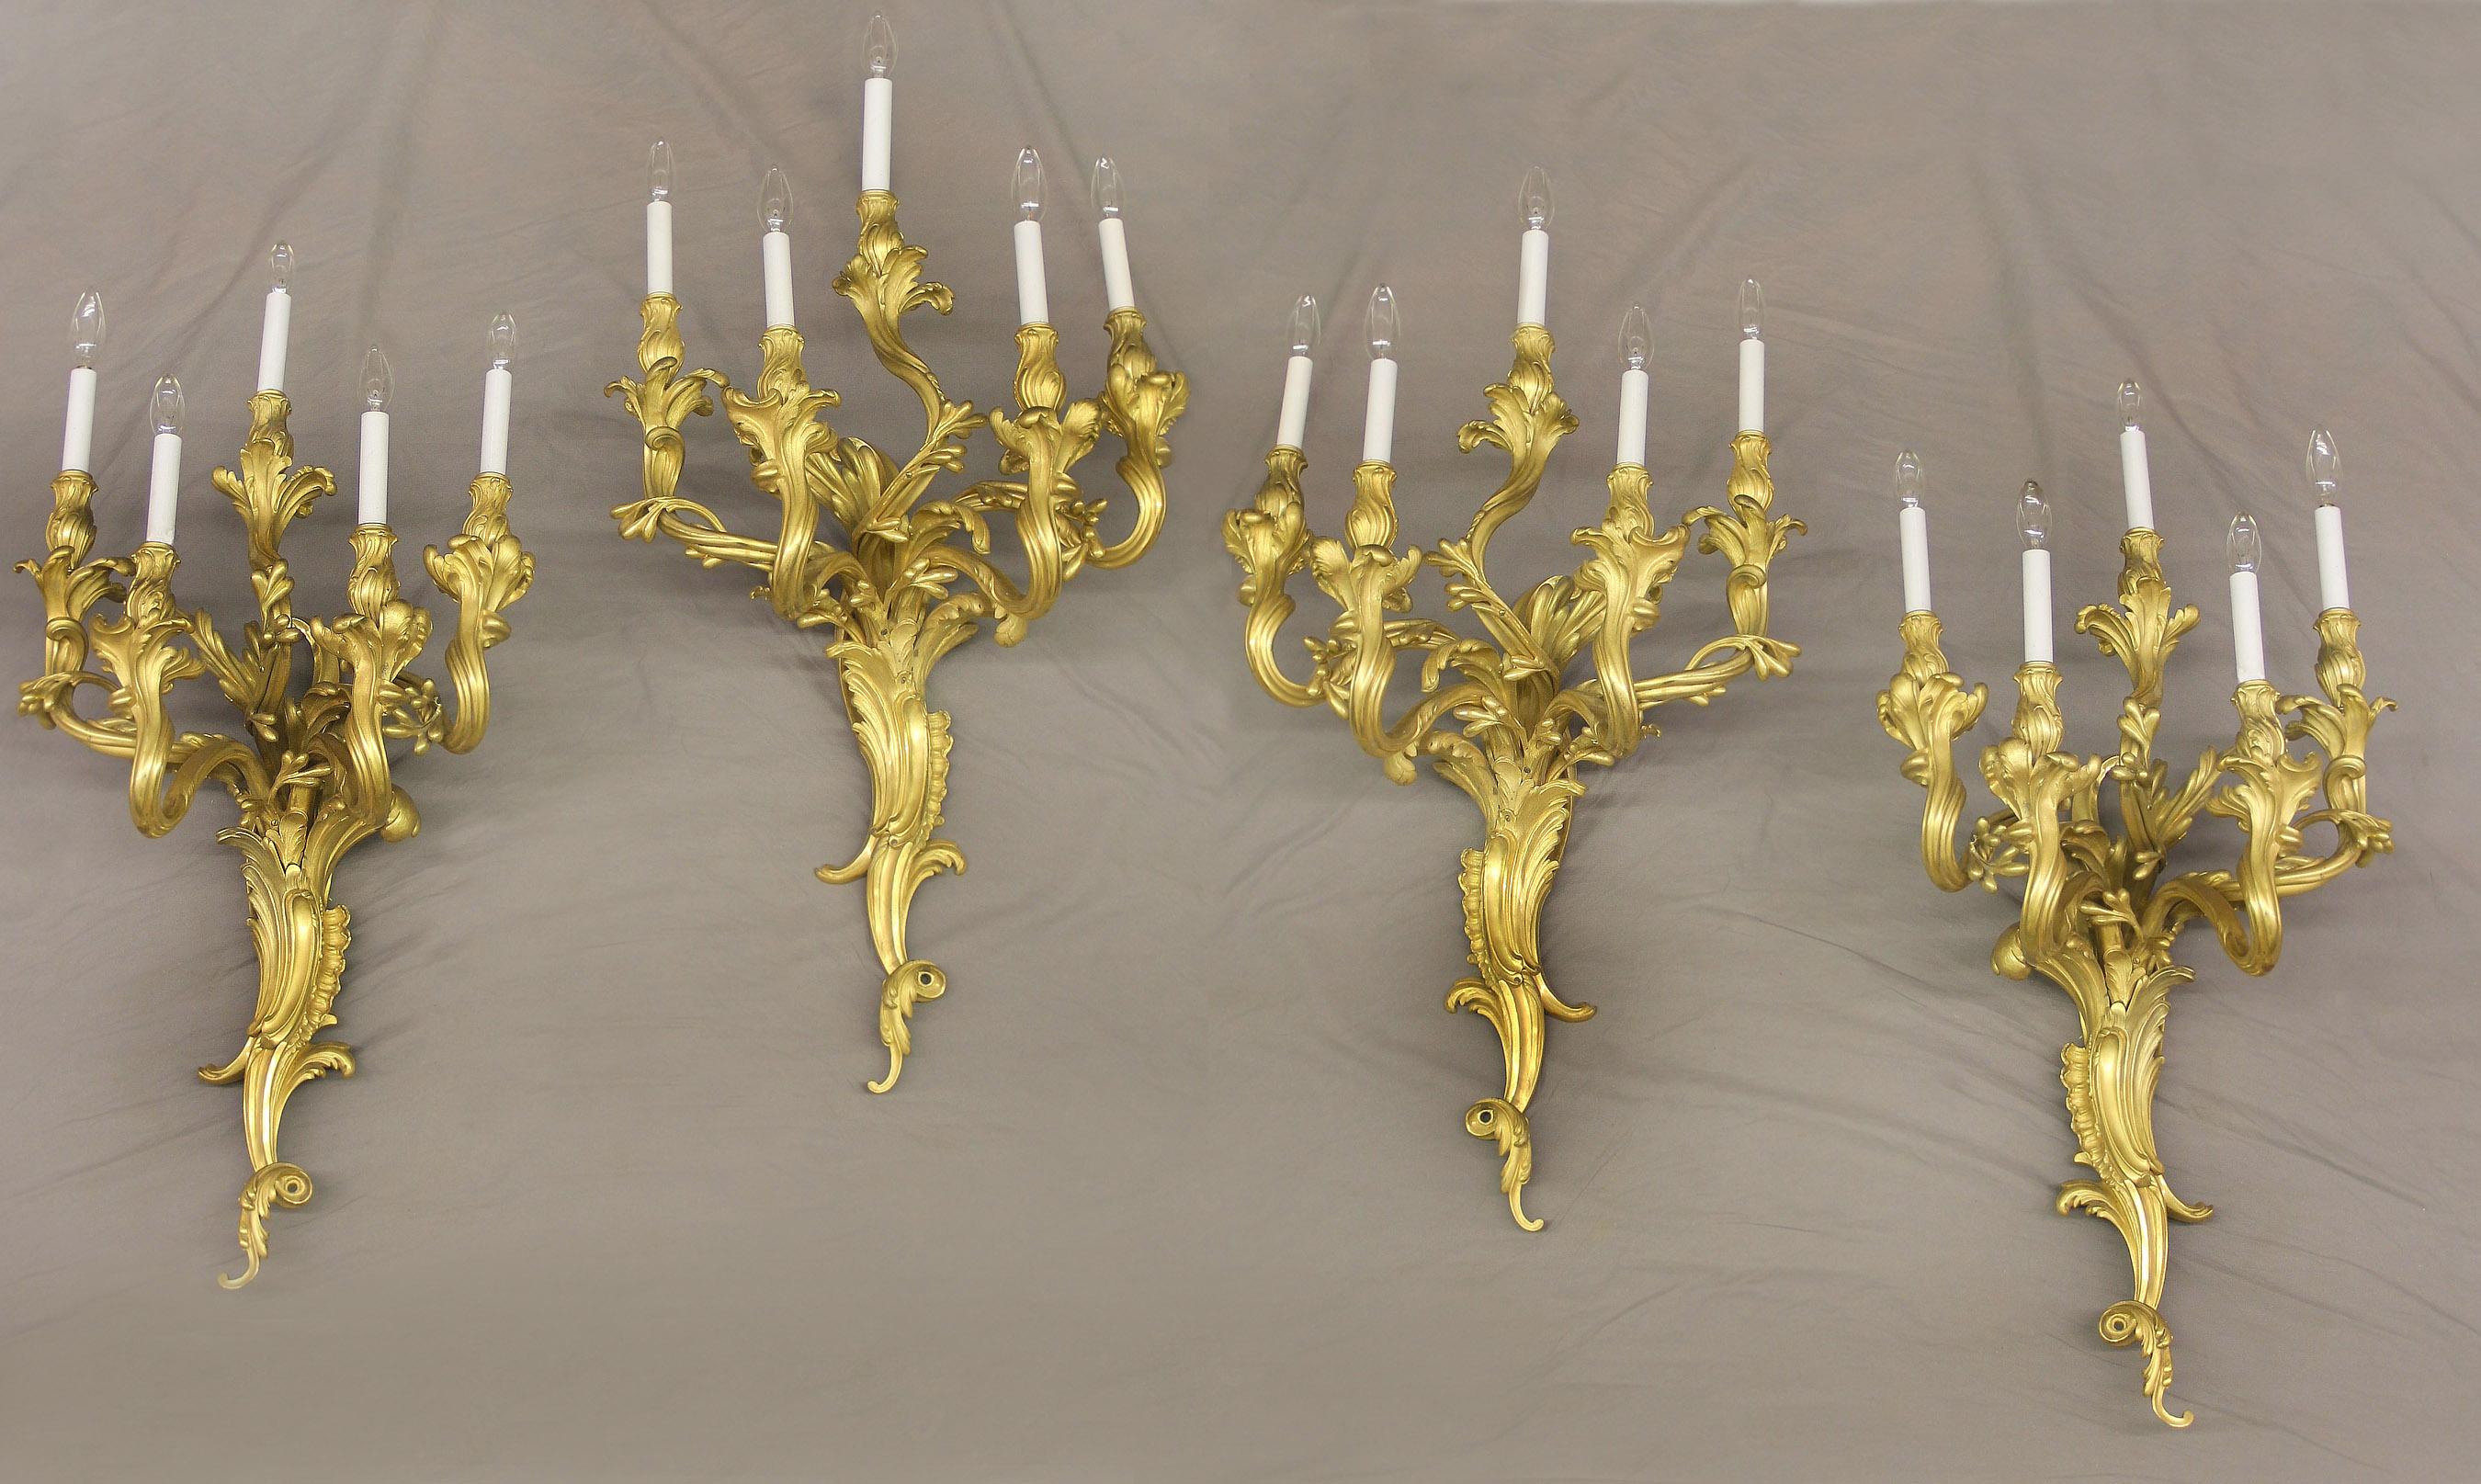 A very fine set of four early 20th century gilt bronze five light sconces By Caldwell

Edward F. Caldwell and Co. Inc. New York

The beautiful foliate-scolled backplate supporting five tiered, great quality chiseled acanthus candle branches,